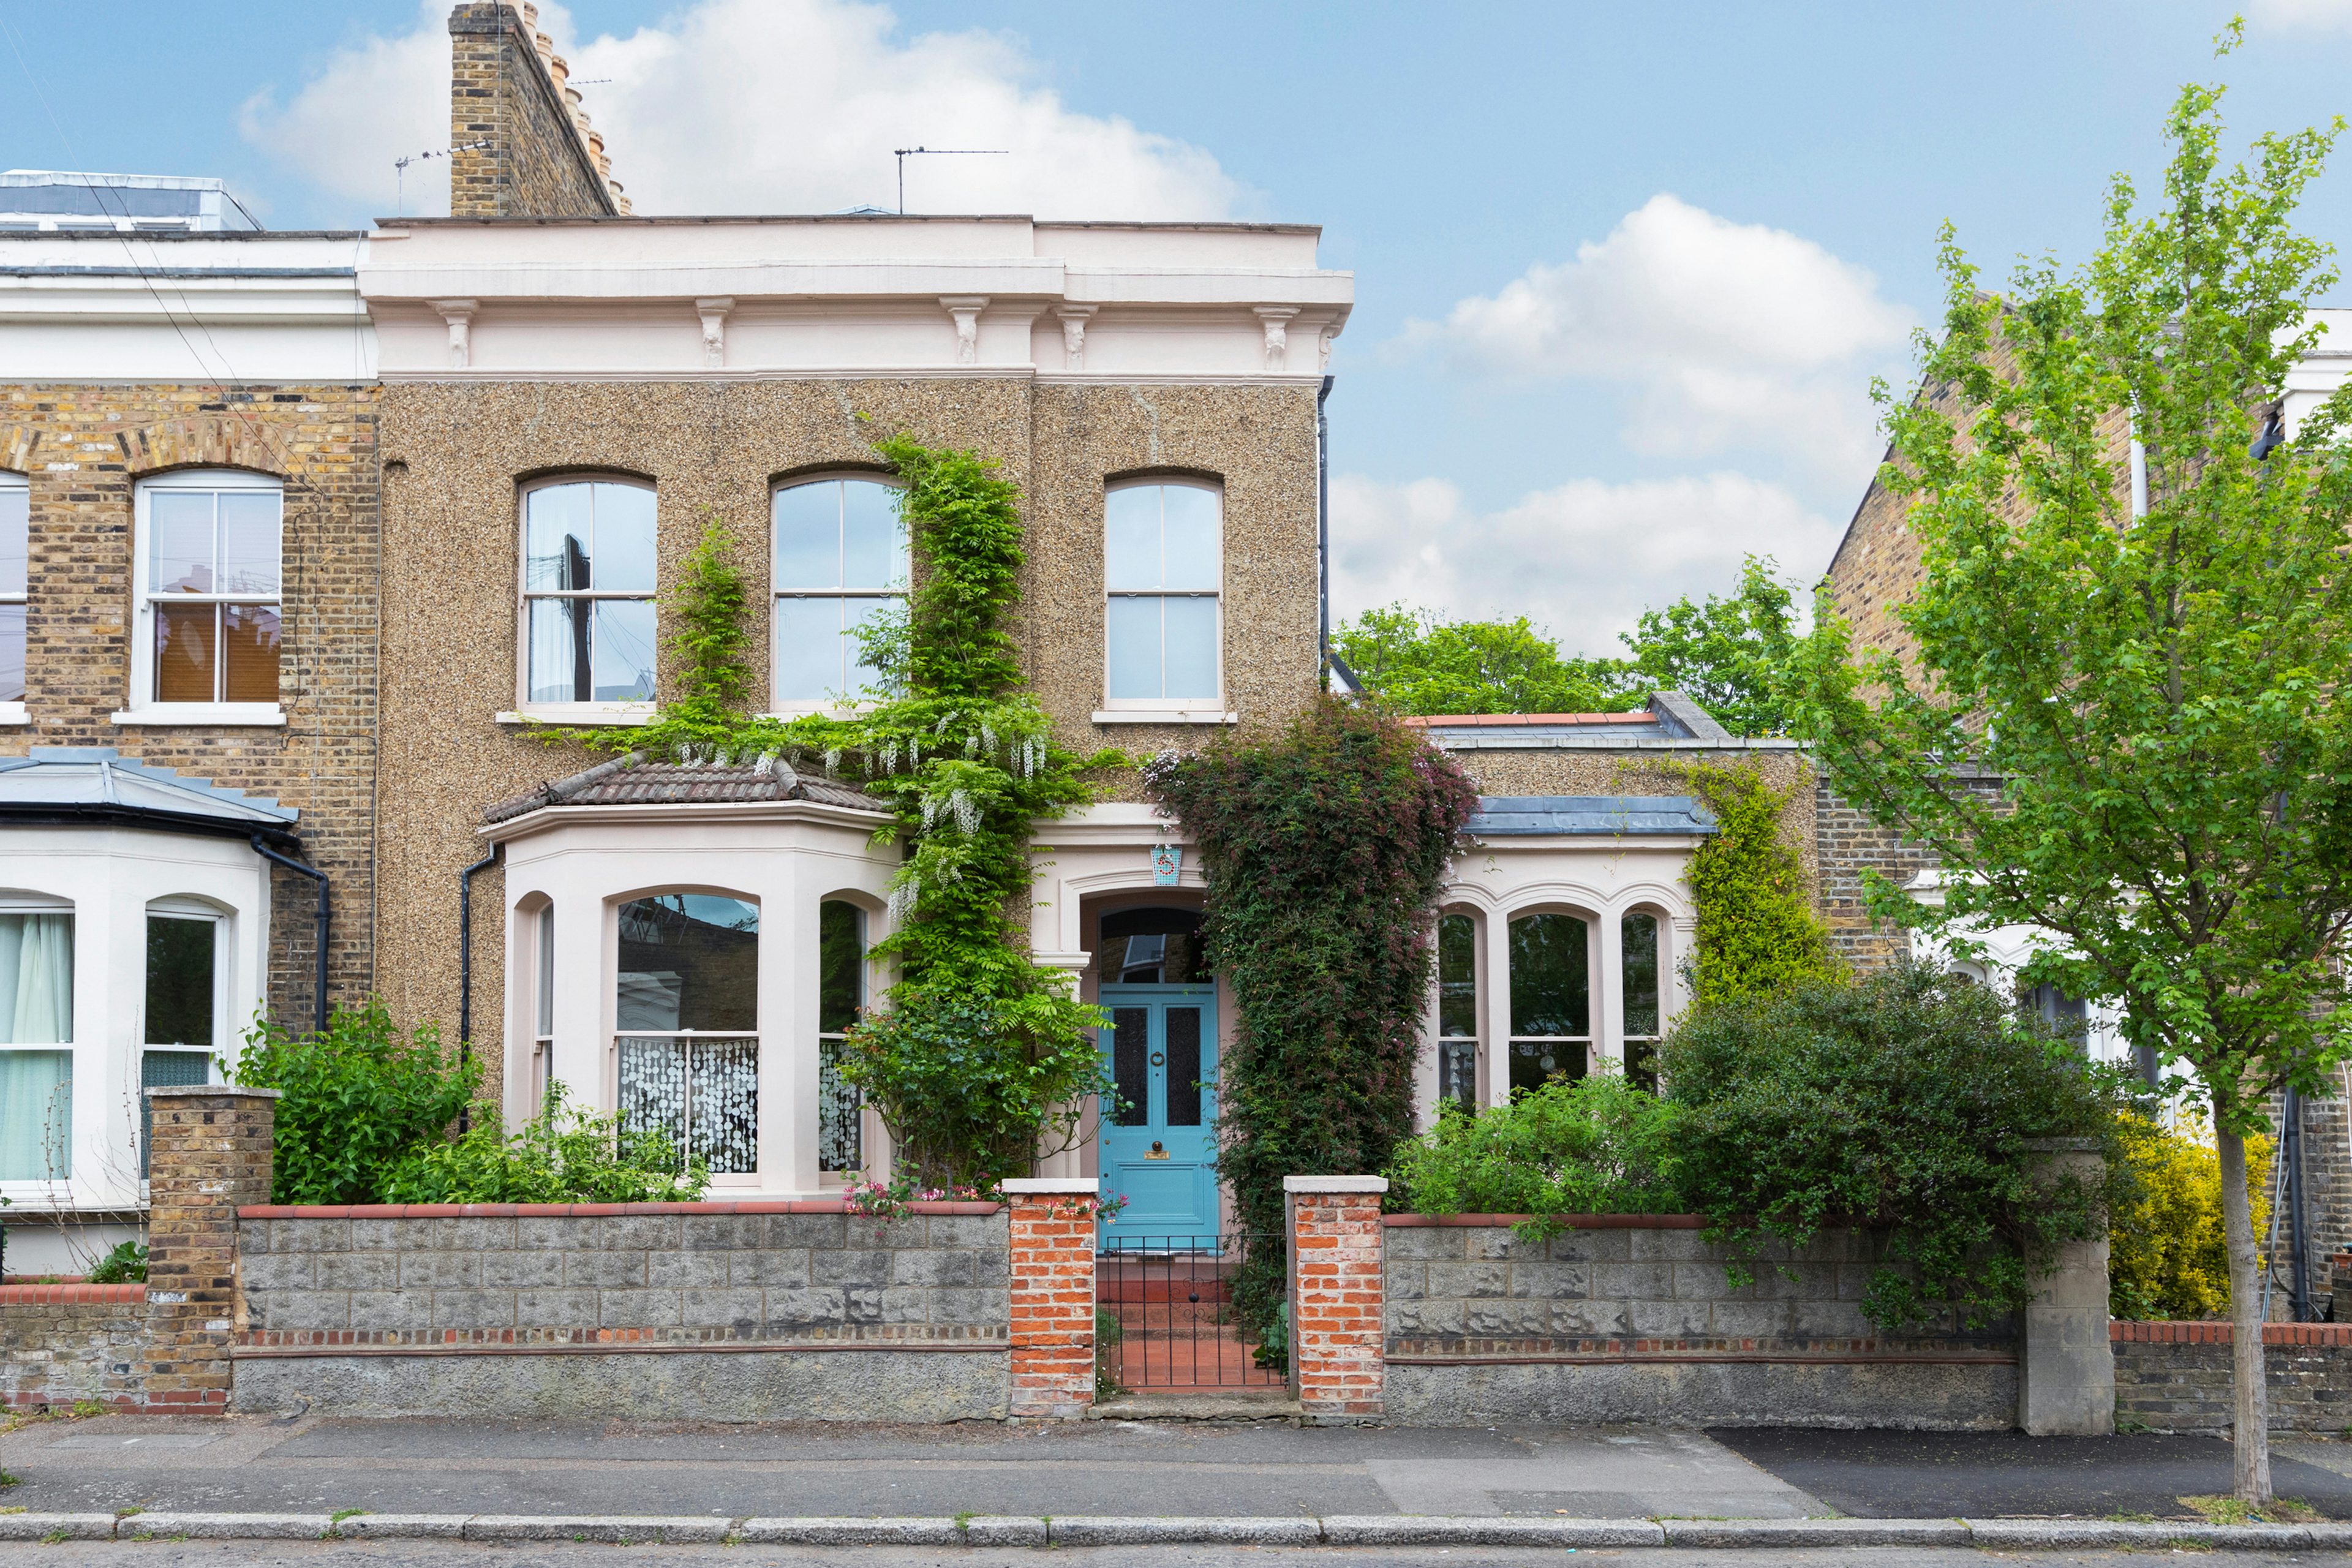 Postcode-free estate agency: what it means and how we work